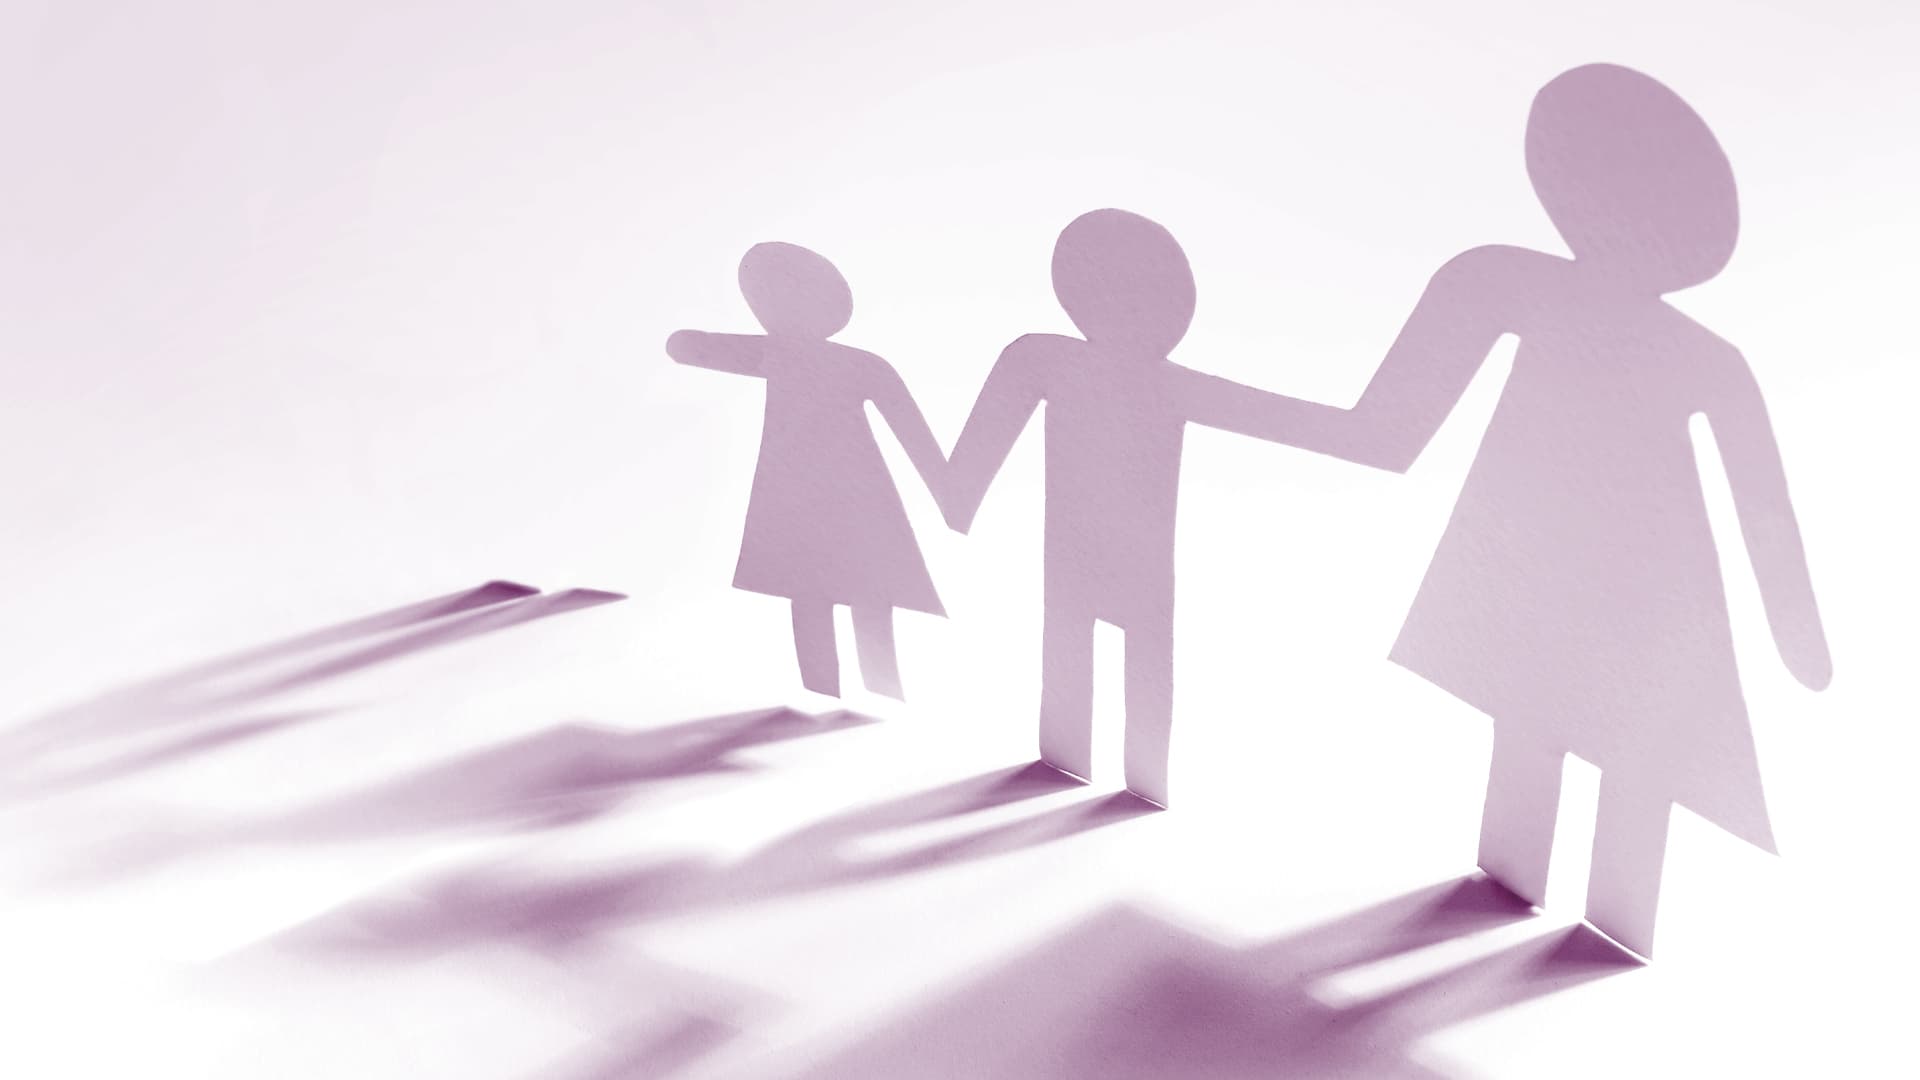 silhouettes of a family of three with a fourth shadow